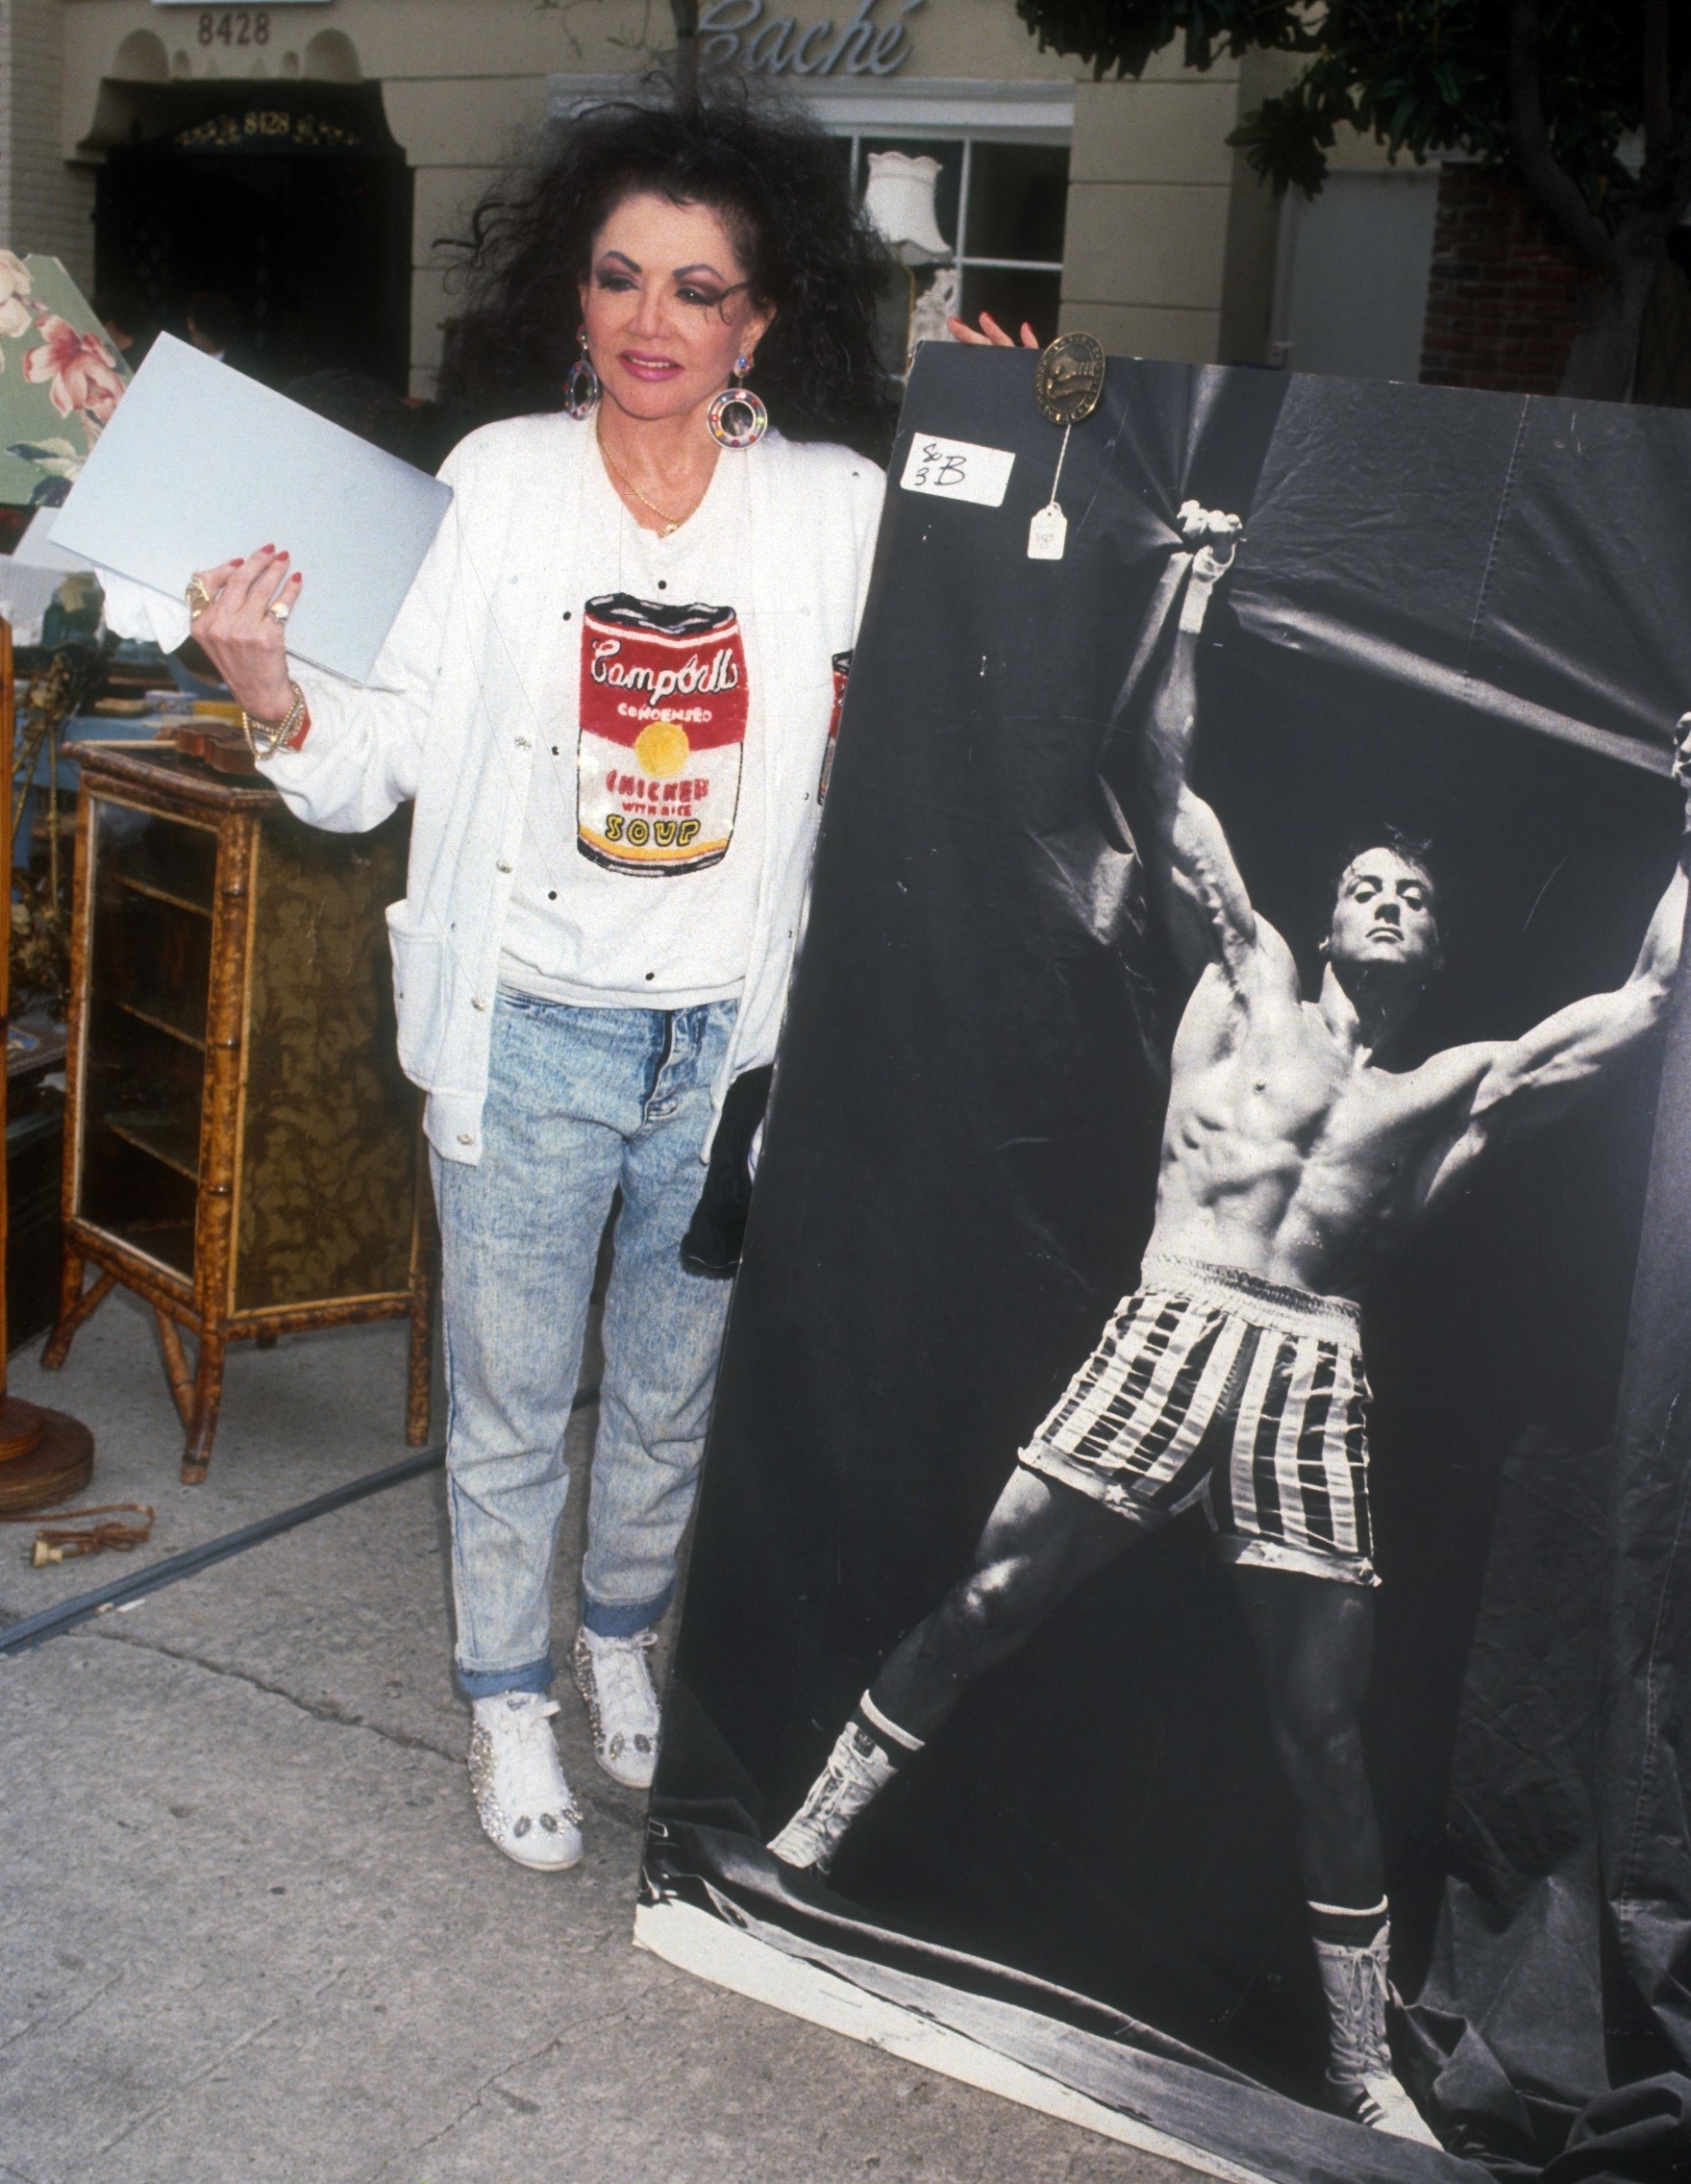 New York, NY  - Sylvester Stallone's mother, Jackie Stallone passes away at 98.

BACKGRID USA 21 SEPTEMBER 2020,Image: 559132739, License: Rights-managed, Restrictions: , Model Release: no, Credit line: MediaPunch / BACKGRID / Backgrid USA / Profimedia